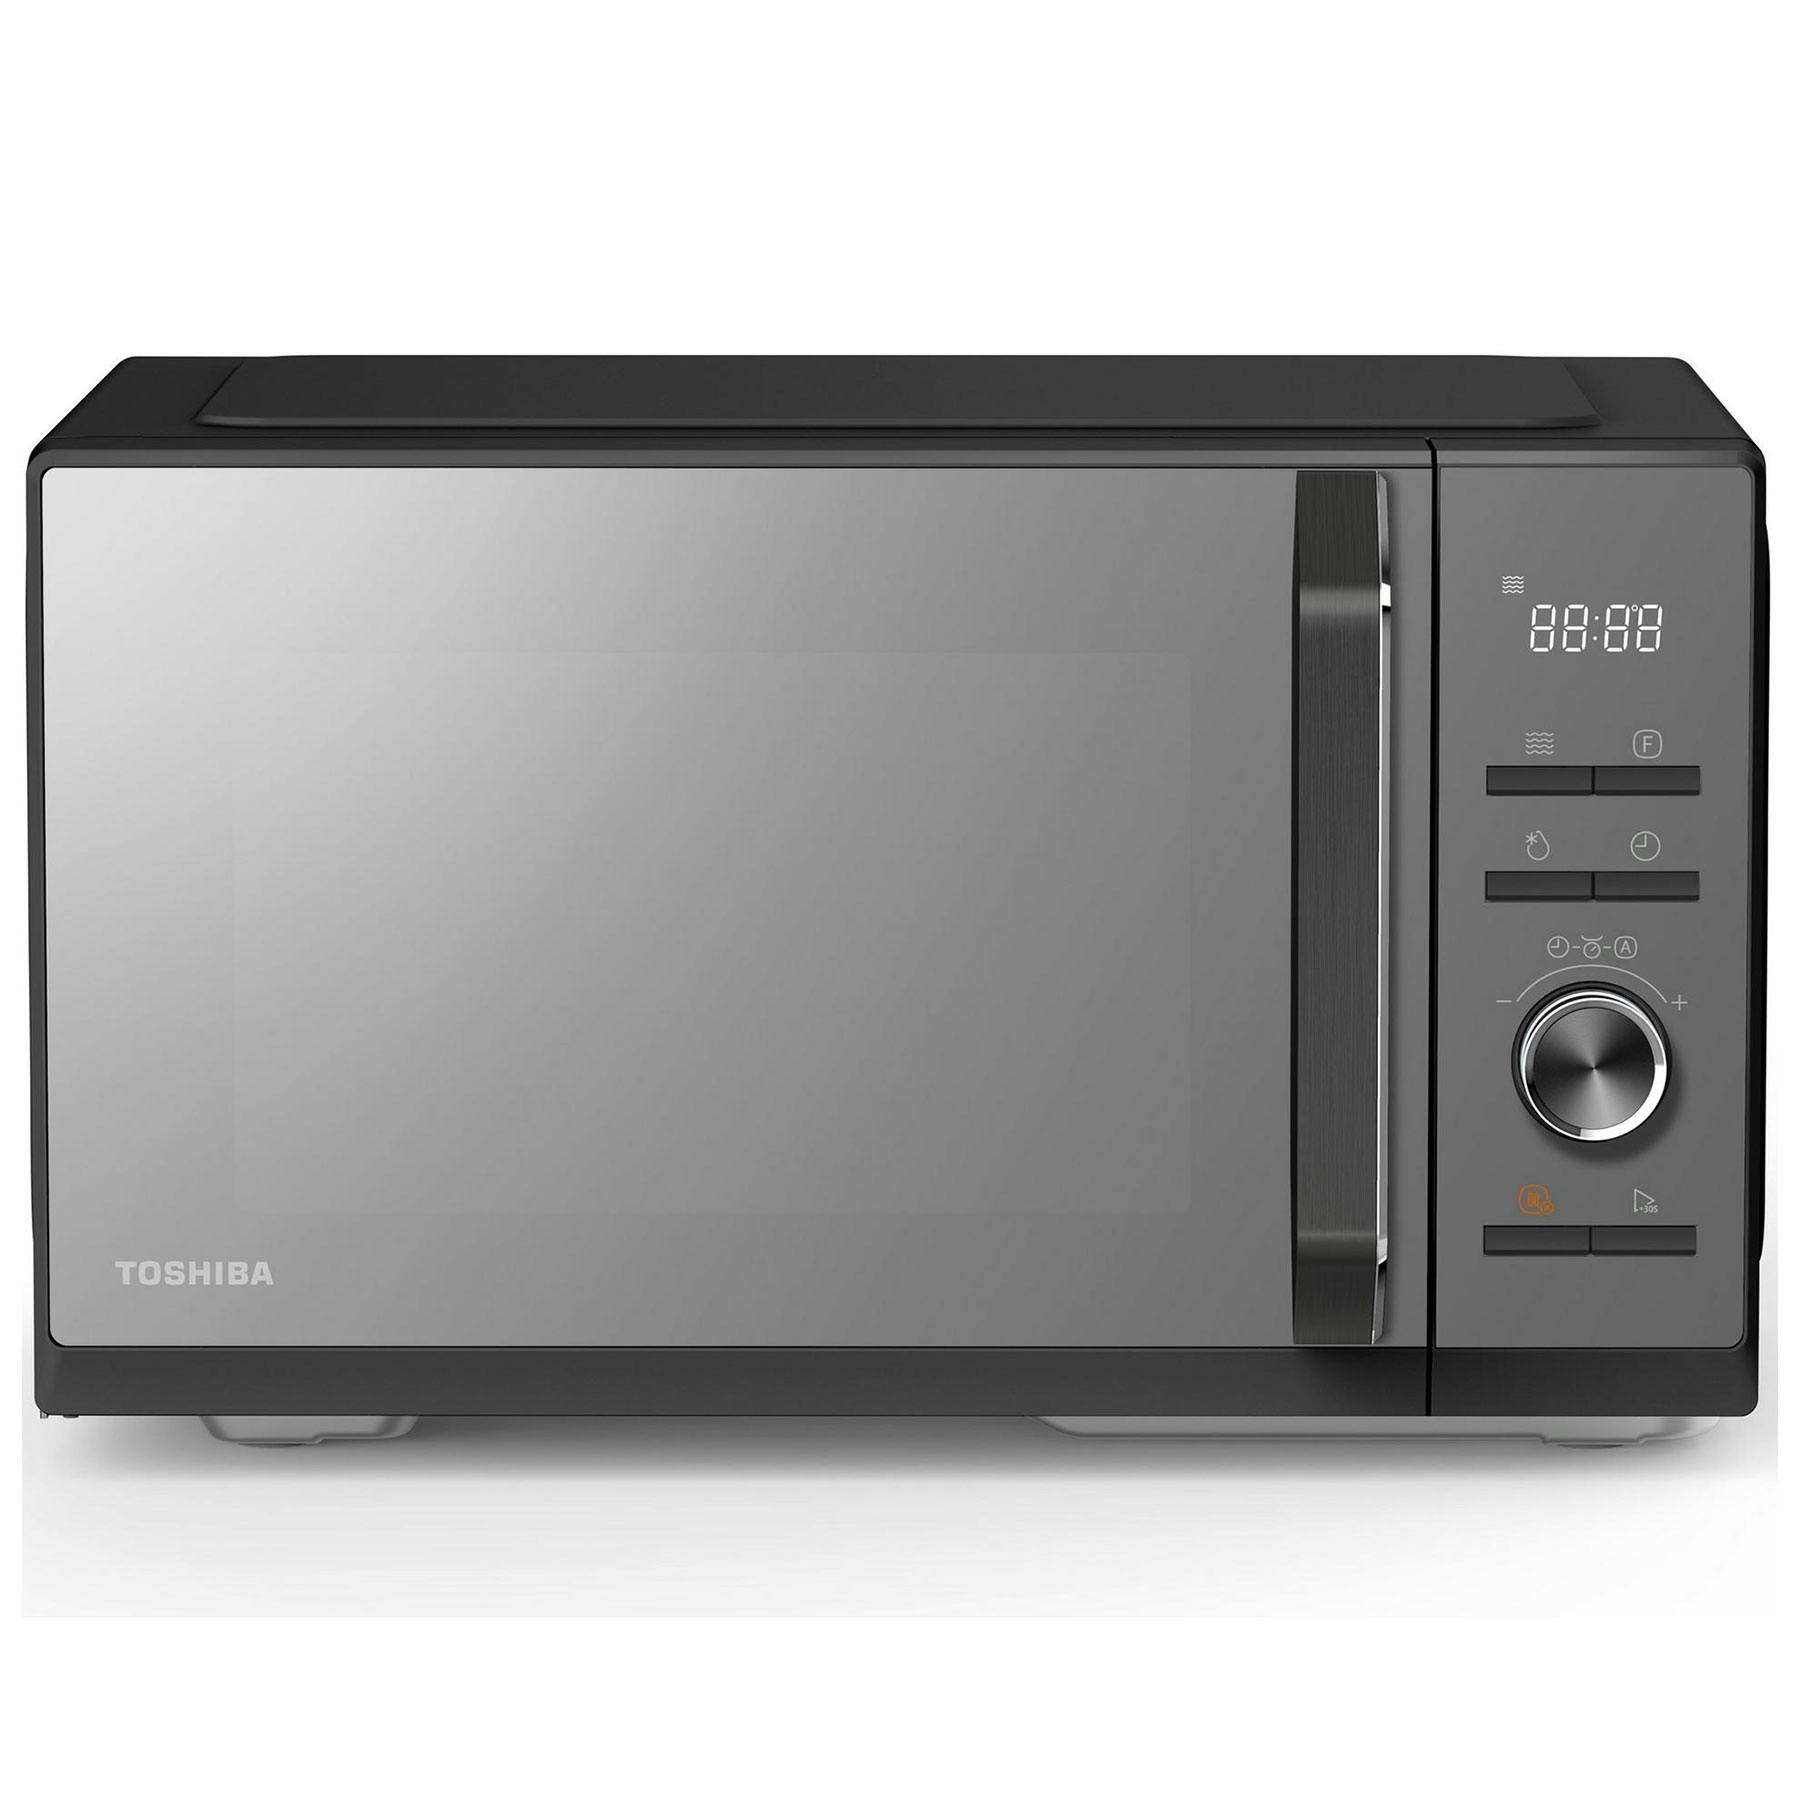 Smart Over-the-Range Wholesale microwave 20l 